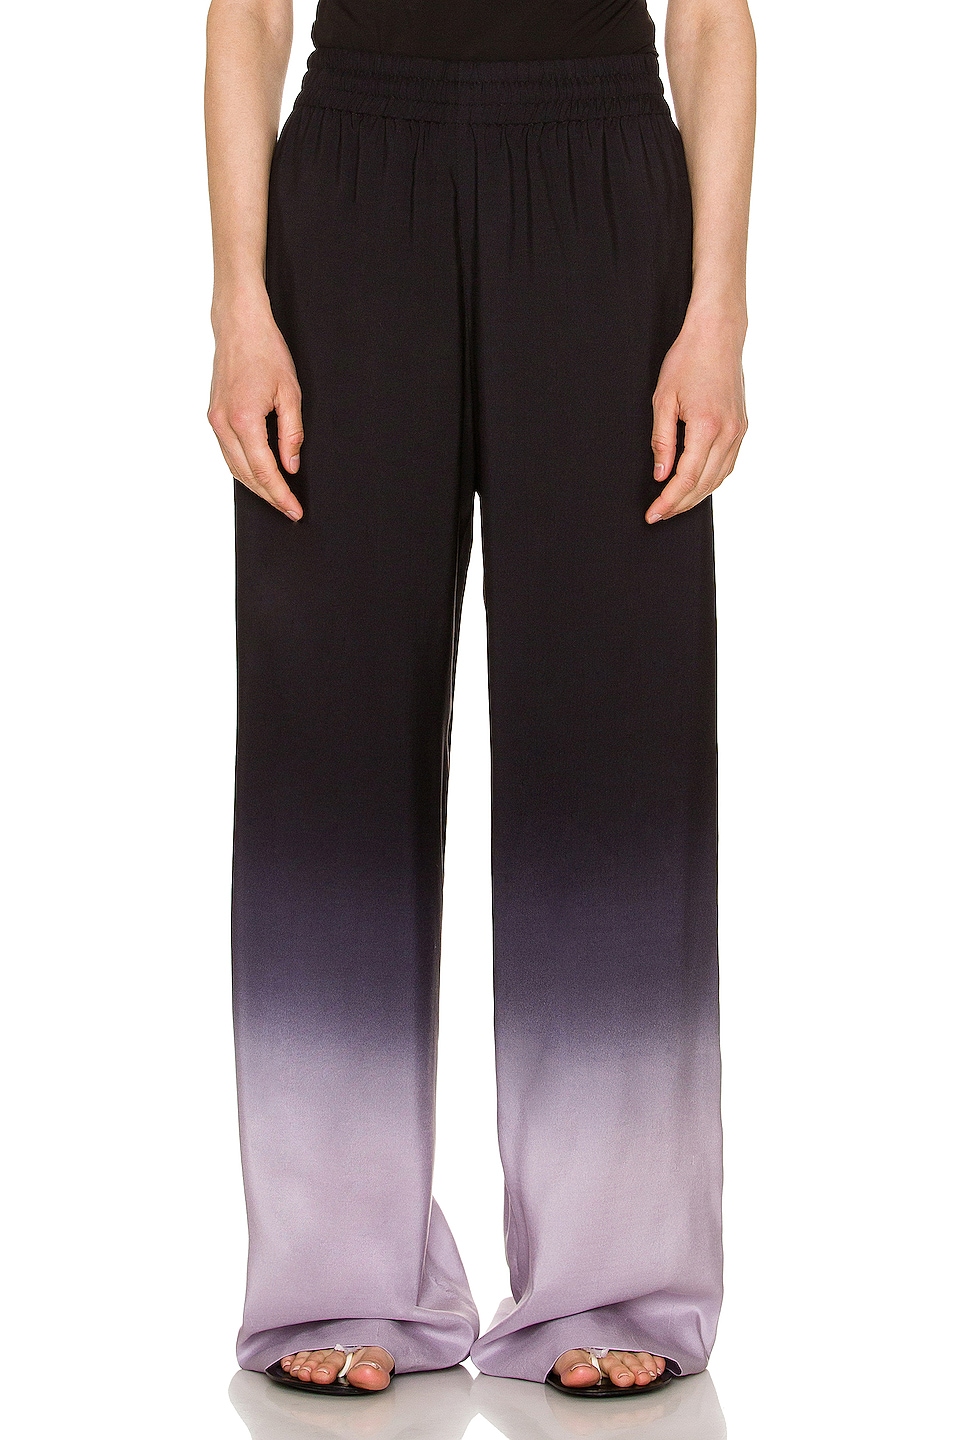 Image 1 of The Row Avante Pant in Black & Lilac